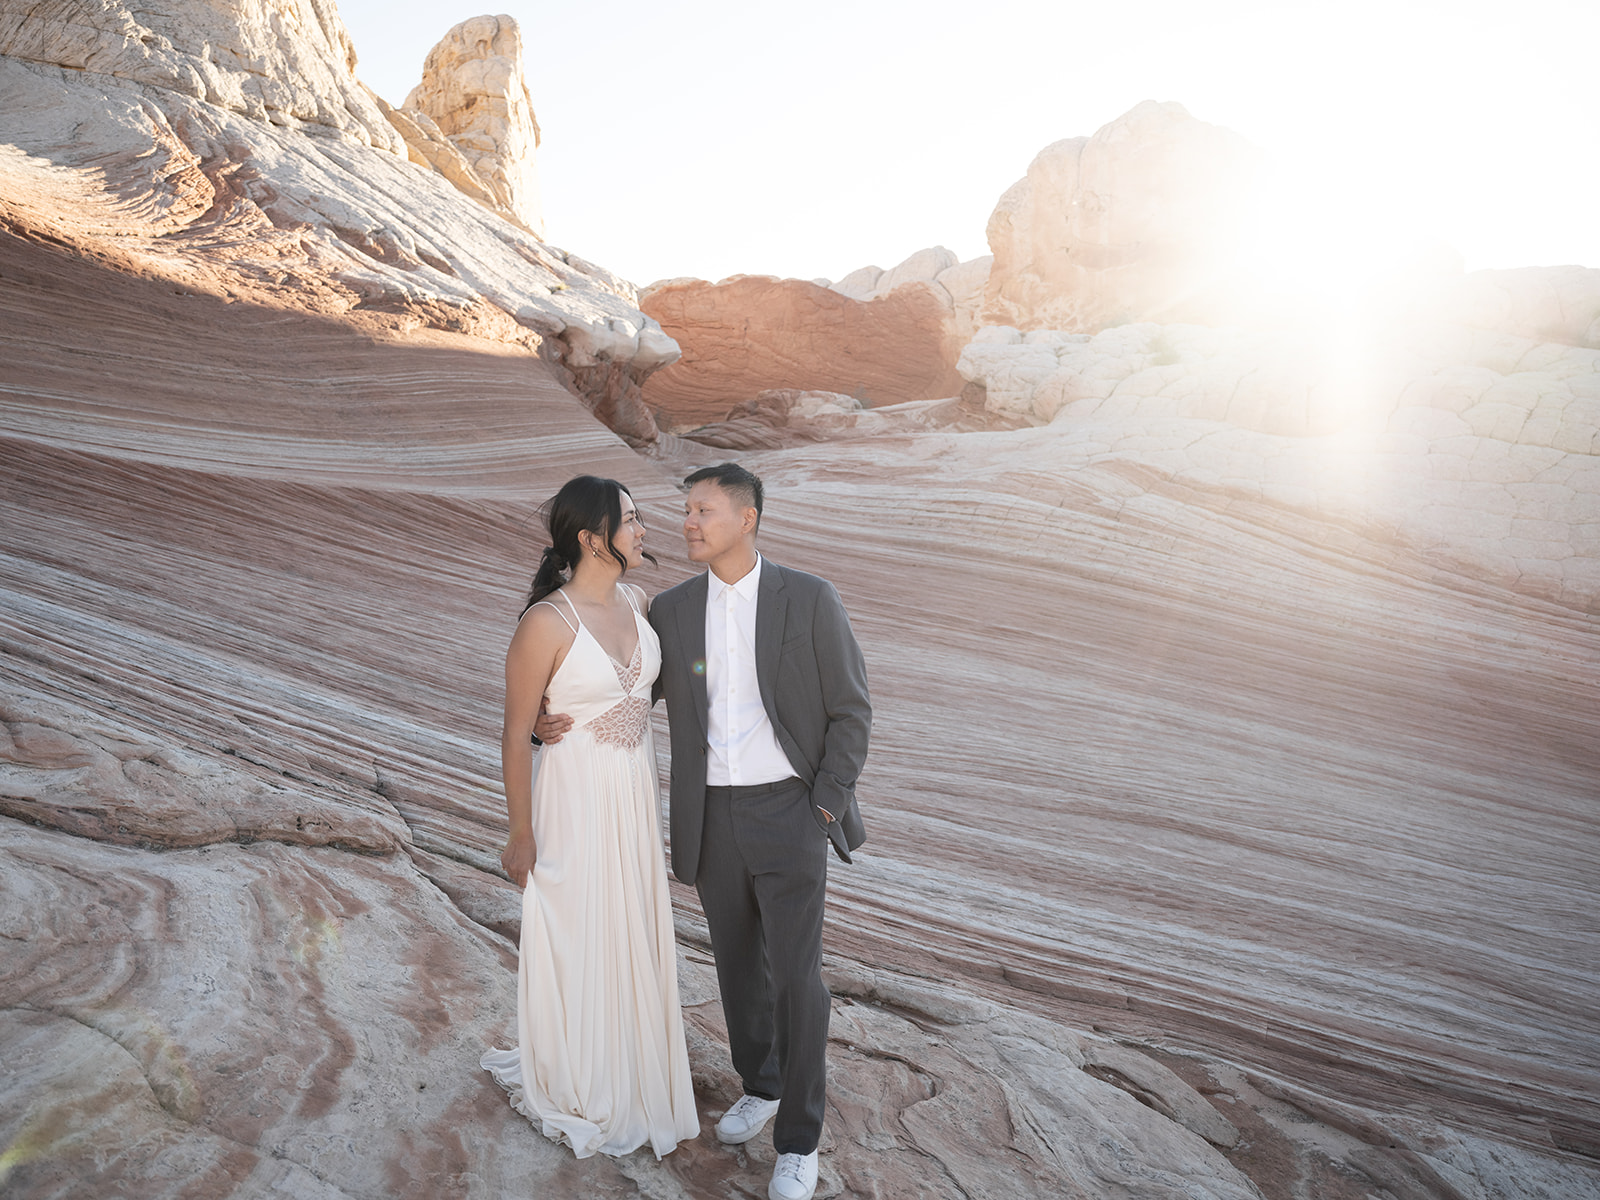 Intimate elopement ceremony at White Pocket, Arizona with breathtaking sandstone formations in the background